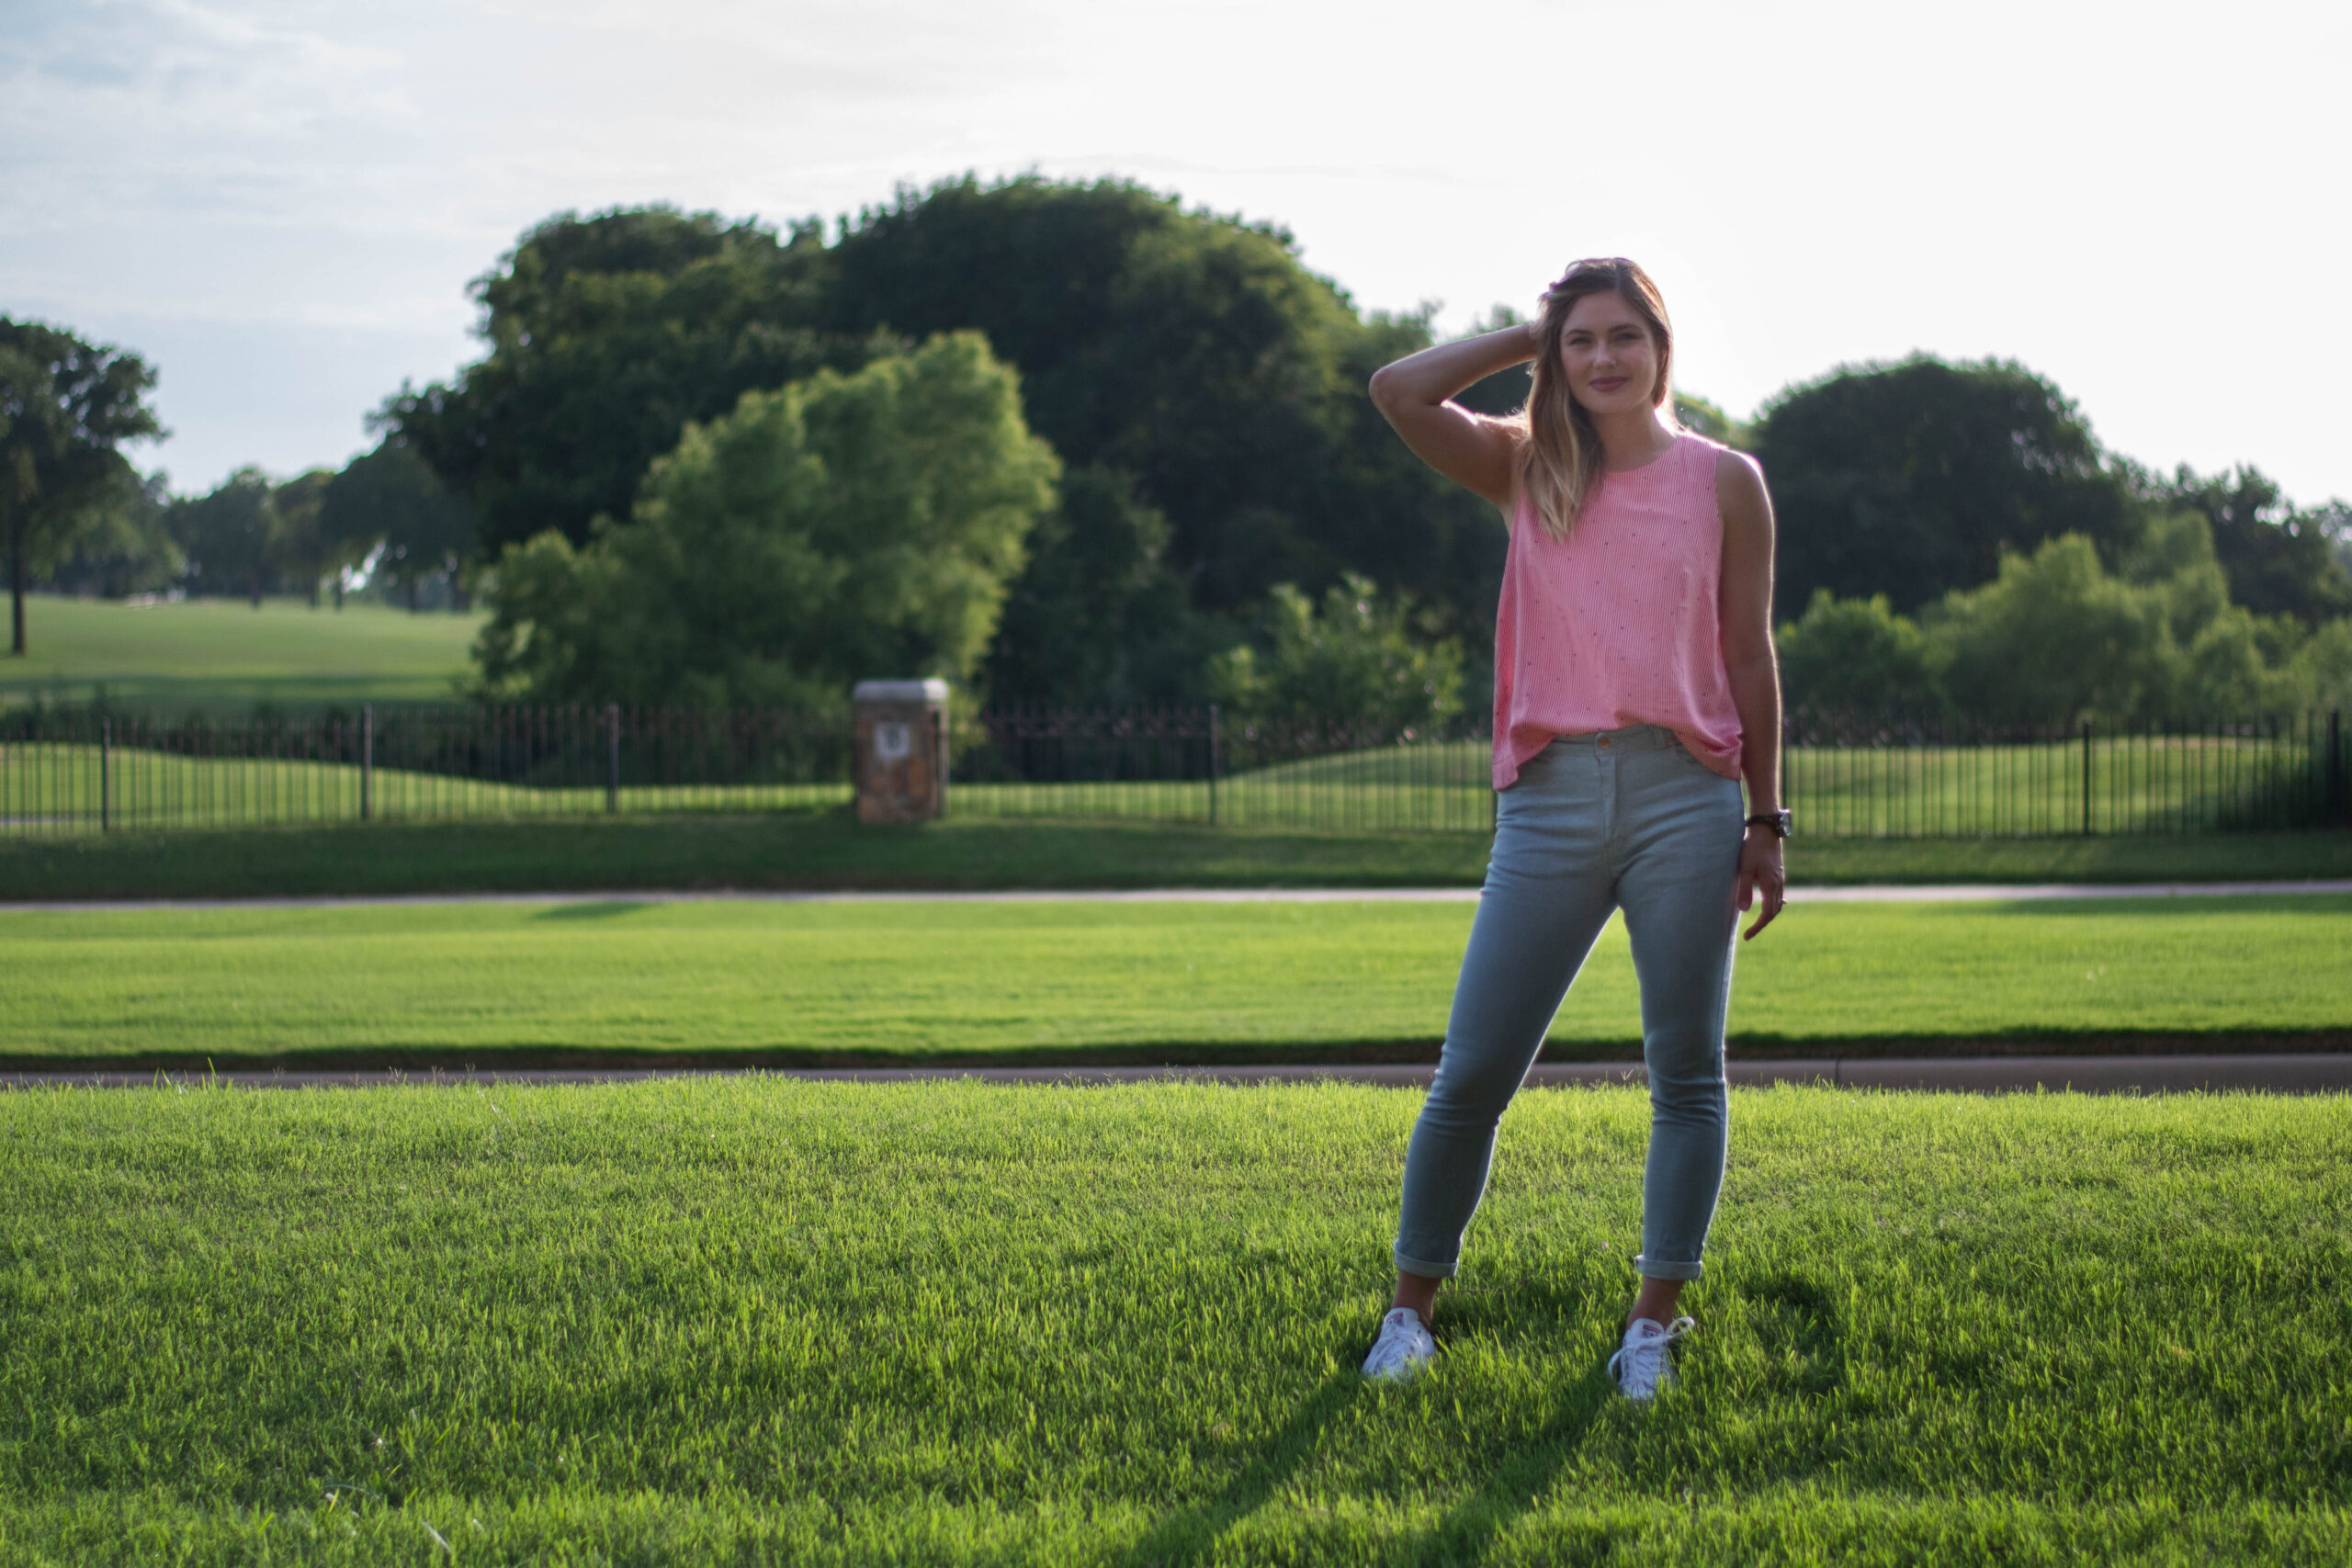 Elizabeth stands on the grass during golden hour wearing a pair of light colored handmade denim jeans, a red and white striped tanktop, and white converse tennishoes. In the background are trees and bushes. Her stance leans slightly to her left, and her right arm is bent upwards, keeping her hair out of her face.